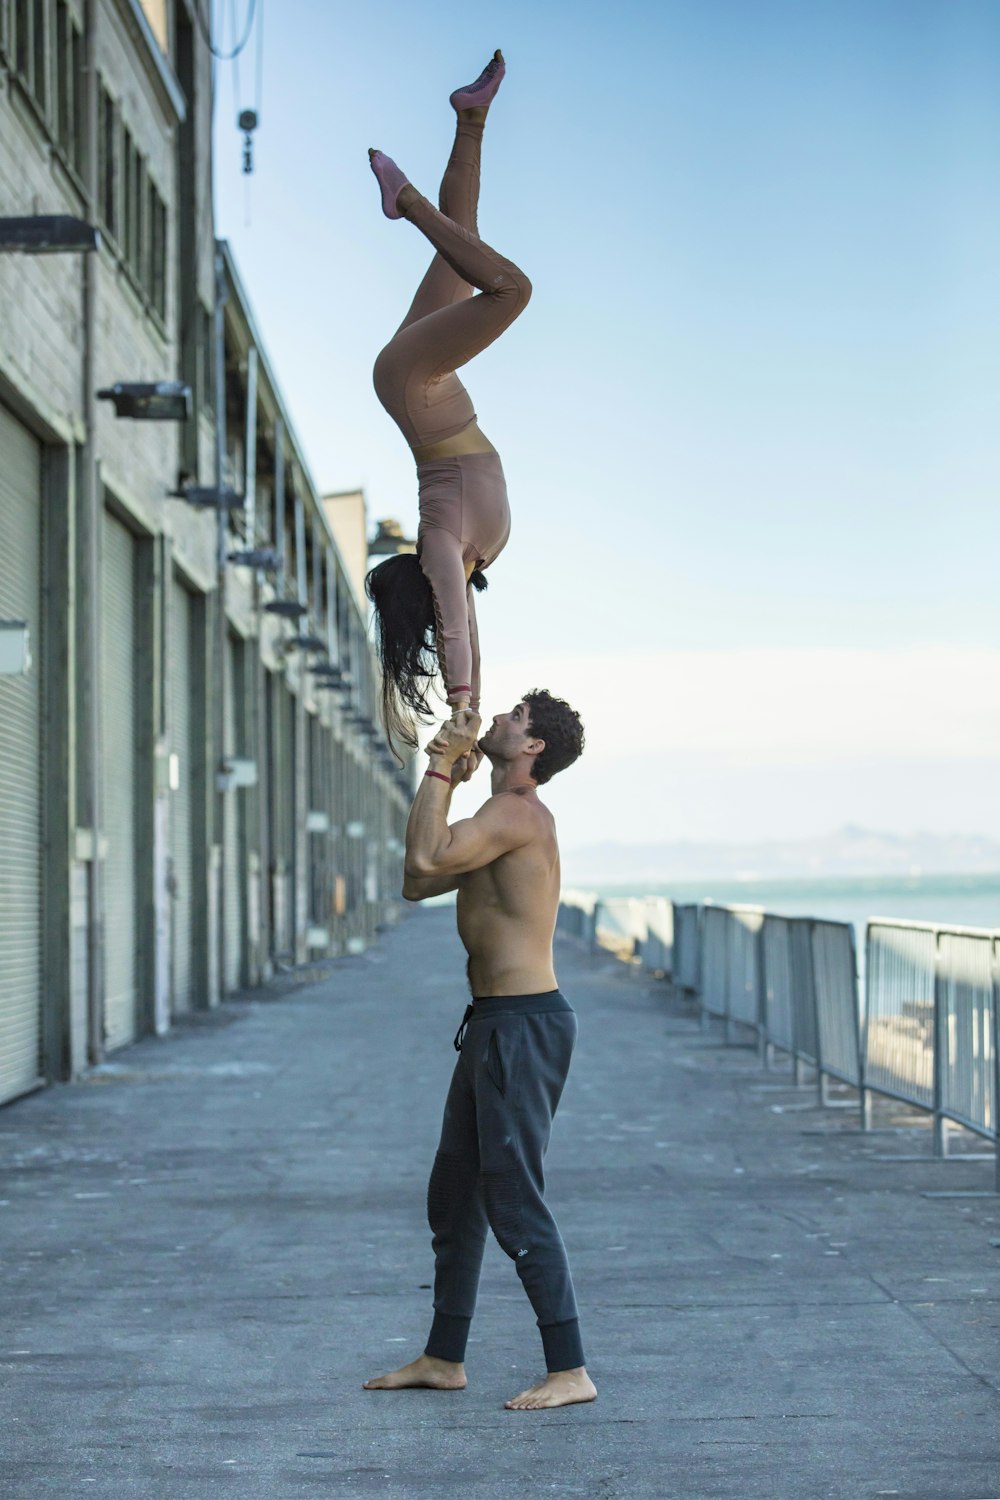 a man and a woman doing acrobatic tricks